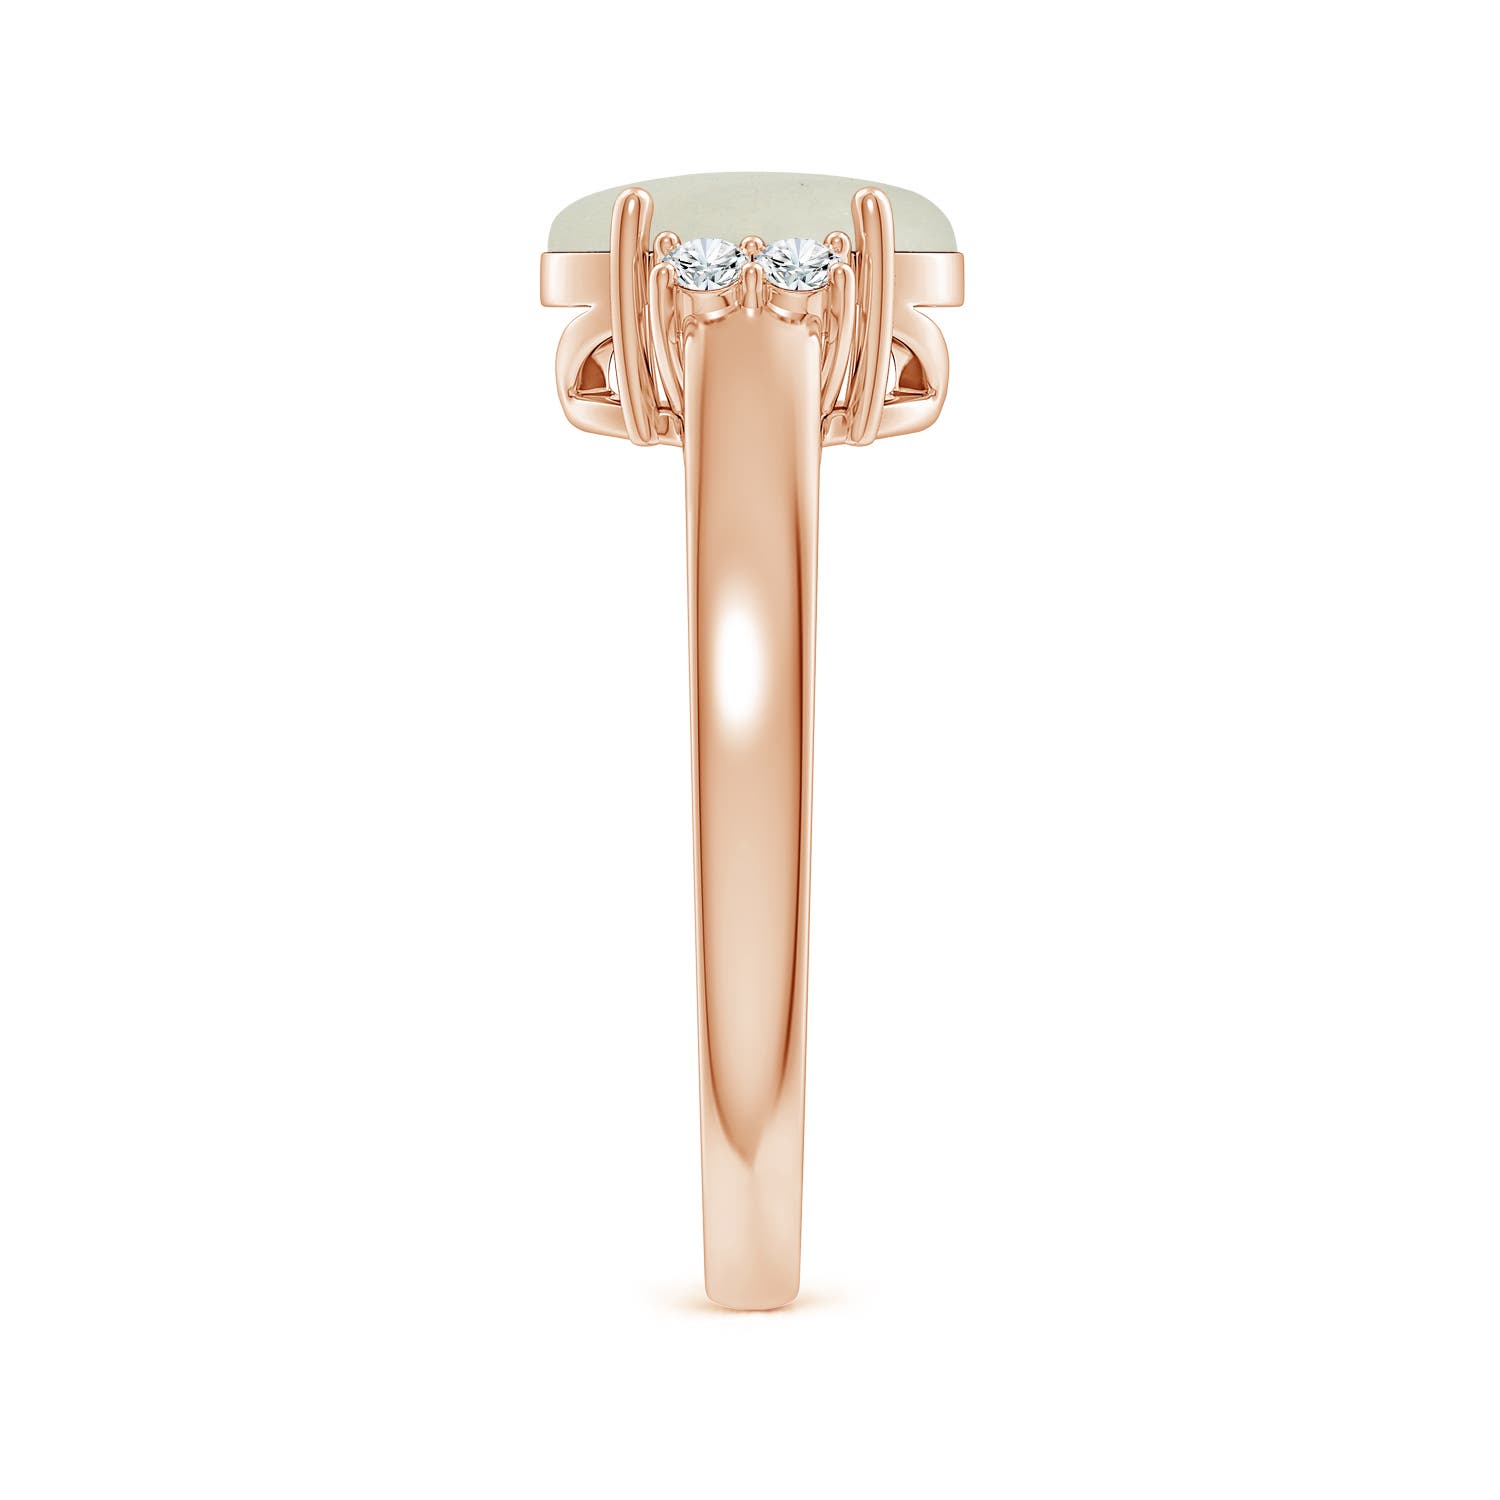 AA - Moonstone / 1.8 CT / 14 KT Rose Gold